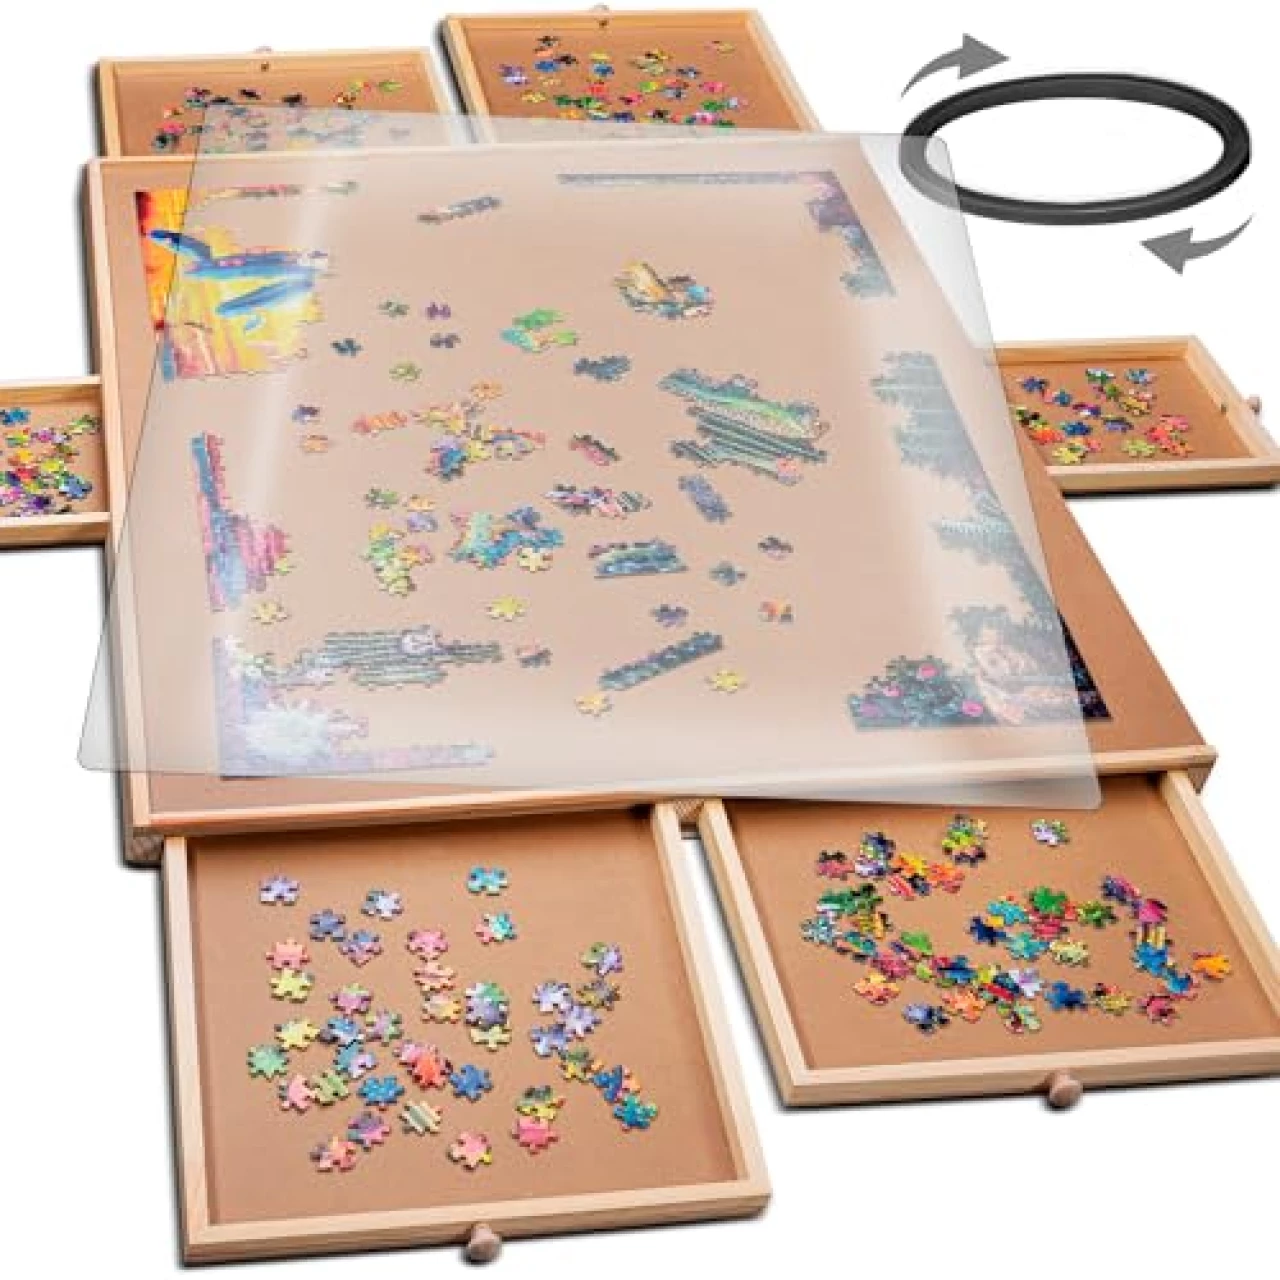 1500 Piece Rotating Wooden Jigsaw Puzzle Table - 6 Drawers, Puzzle Board with Puzzle Cover | 27” X 35” Jigsaw Puzzle Board Portable